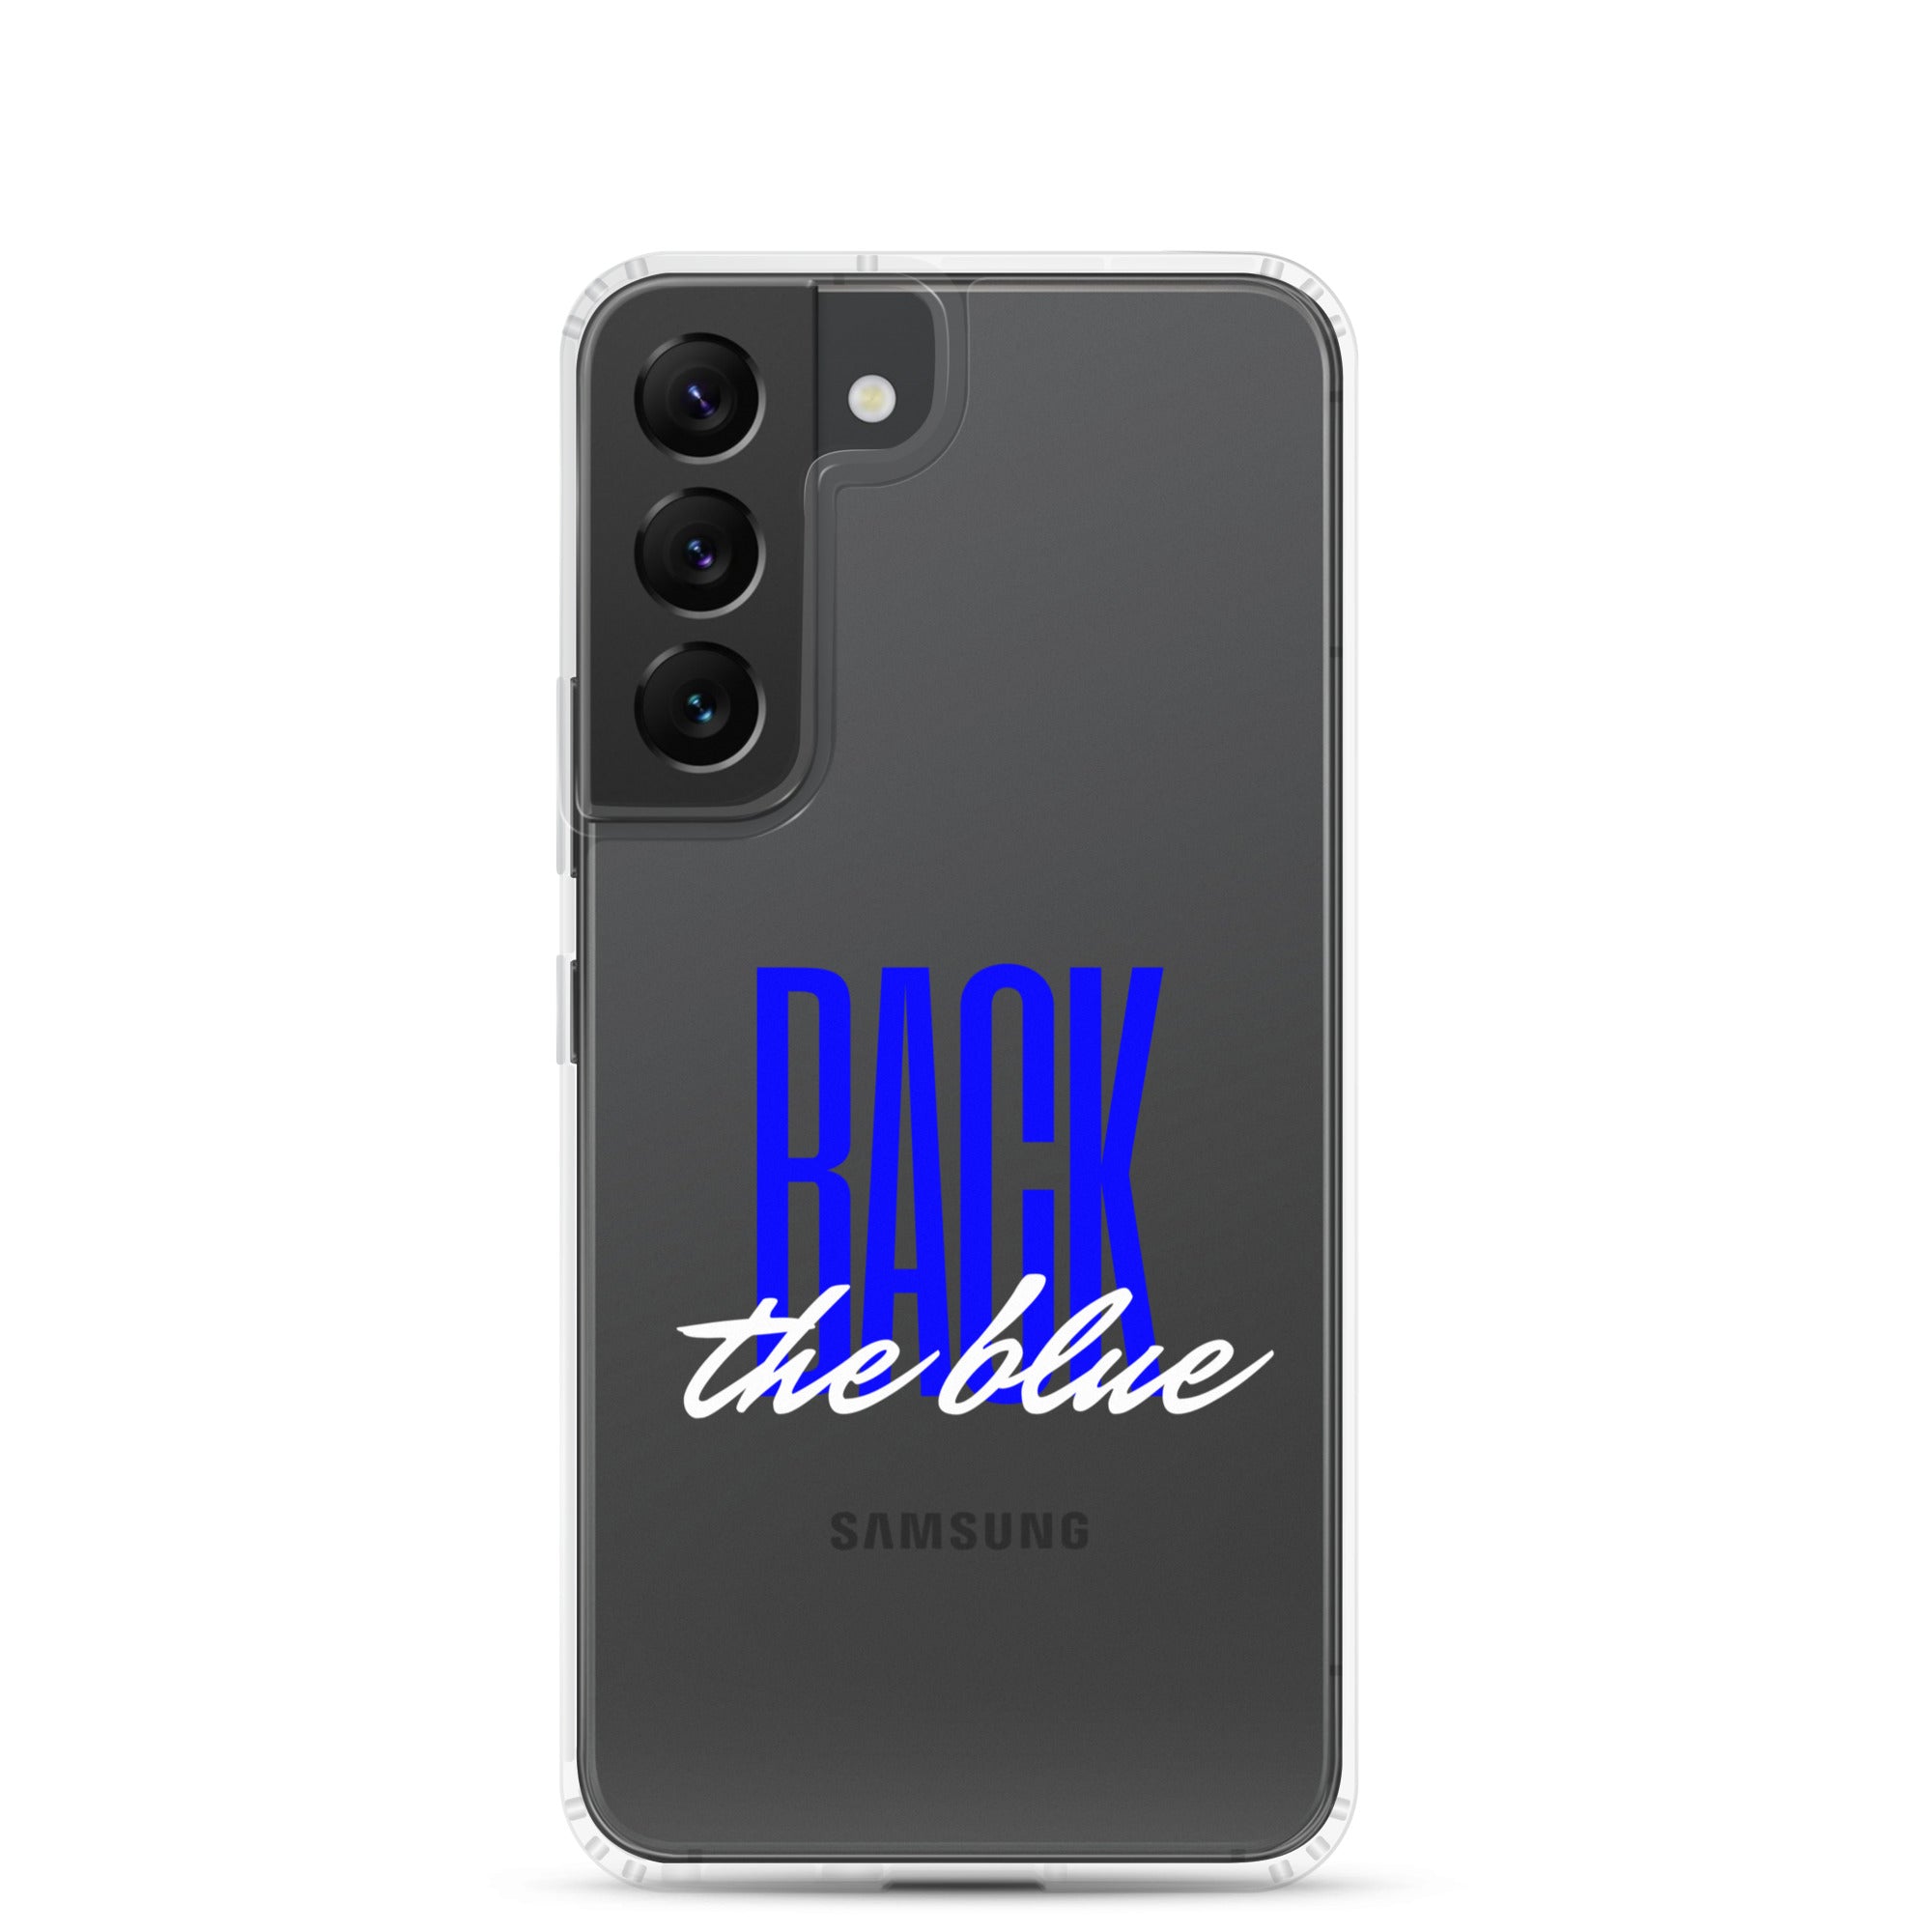 Back the Blue (White Text) Samsung Case